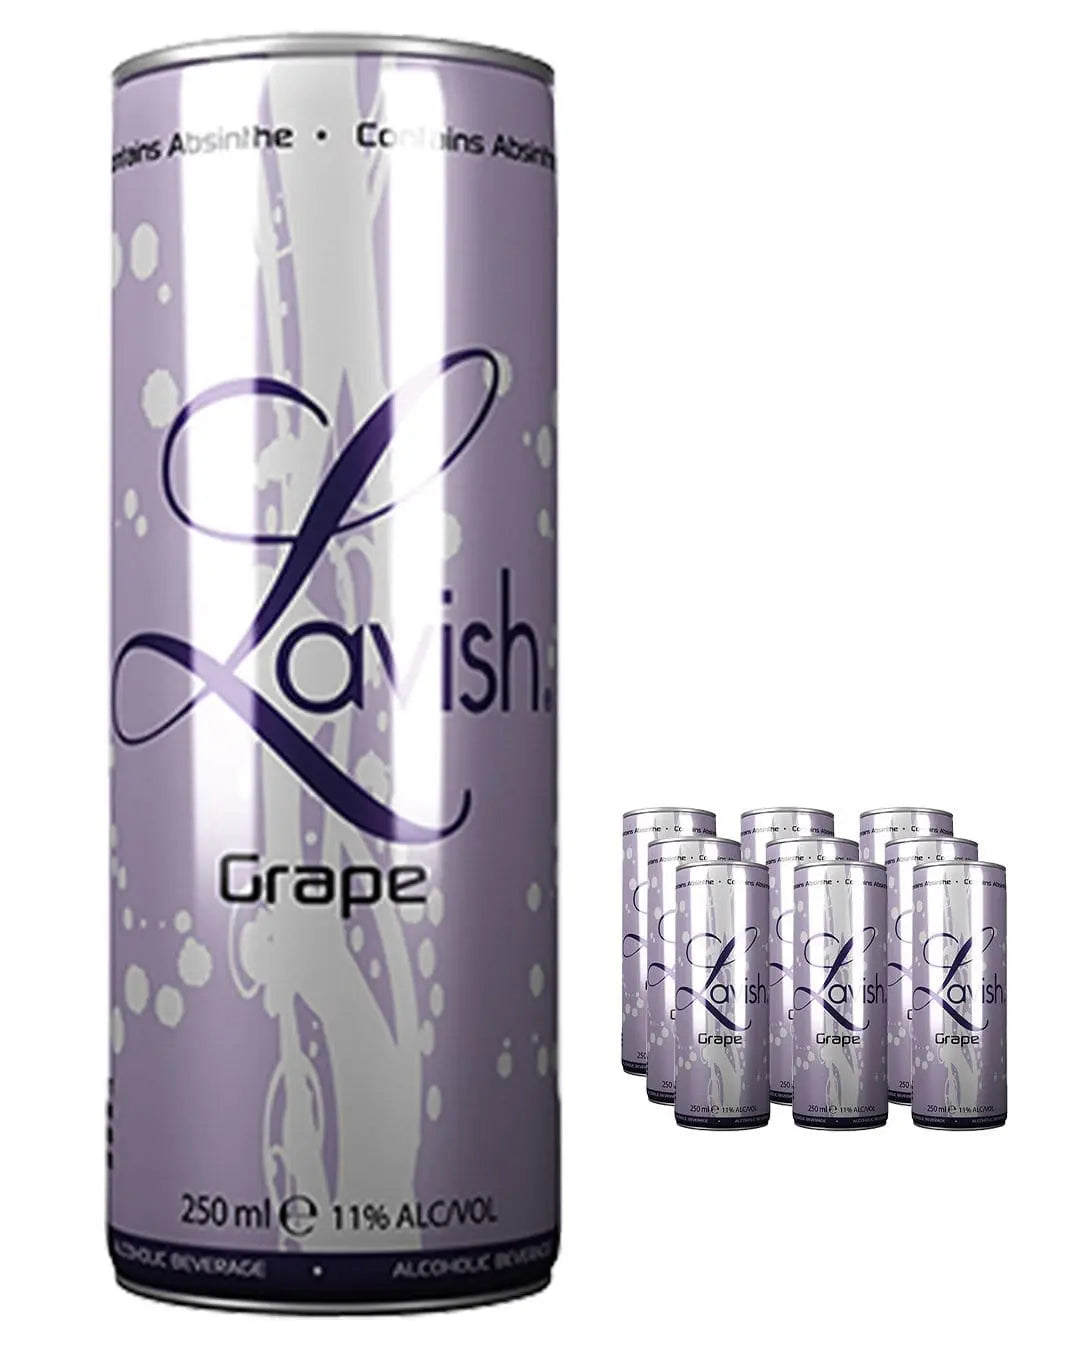 Lavish Grape & Absinthe Cocktail Can Multipack, 12 x 250 ml Ready Made Cocktails 812374020078